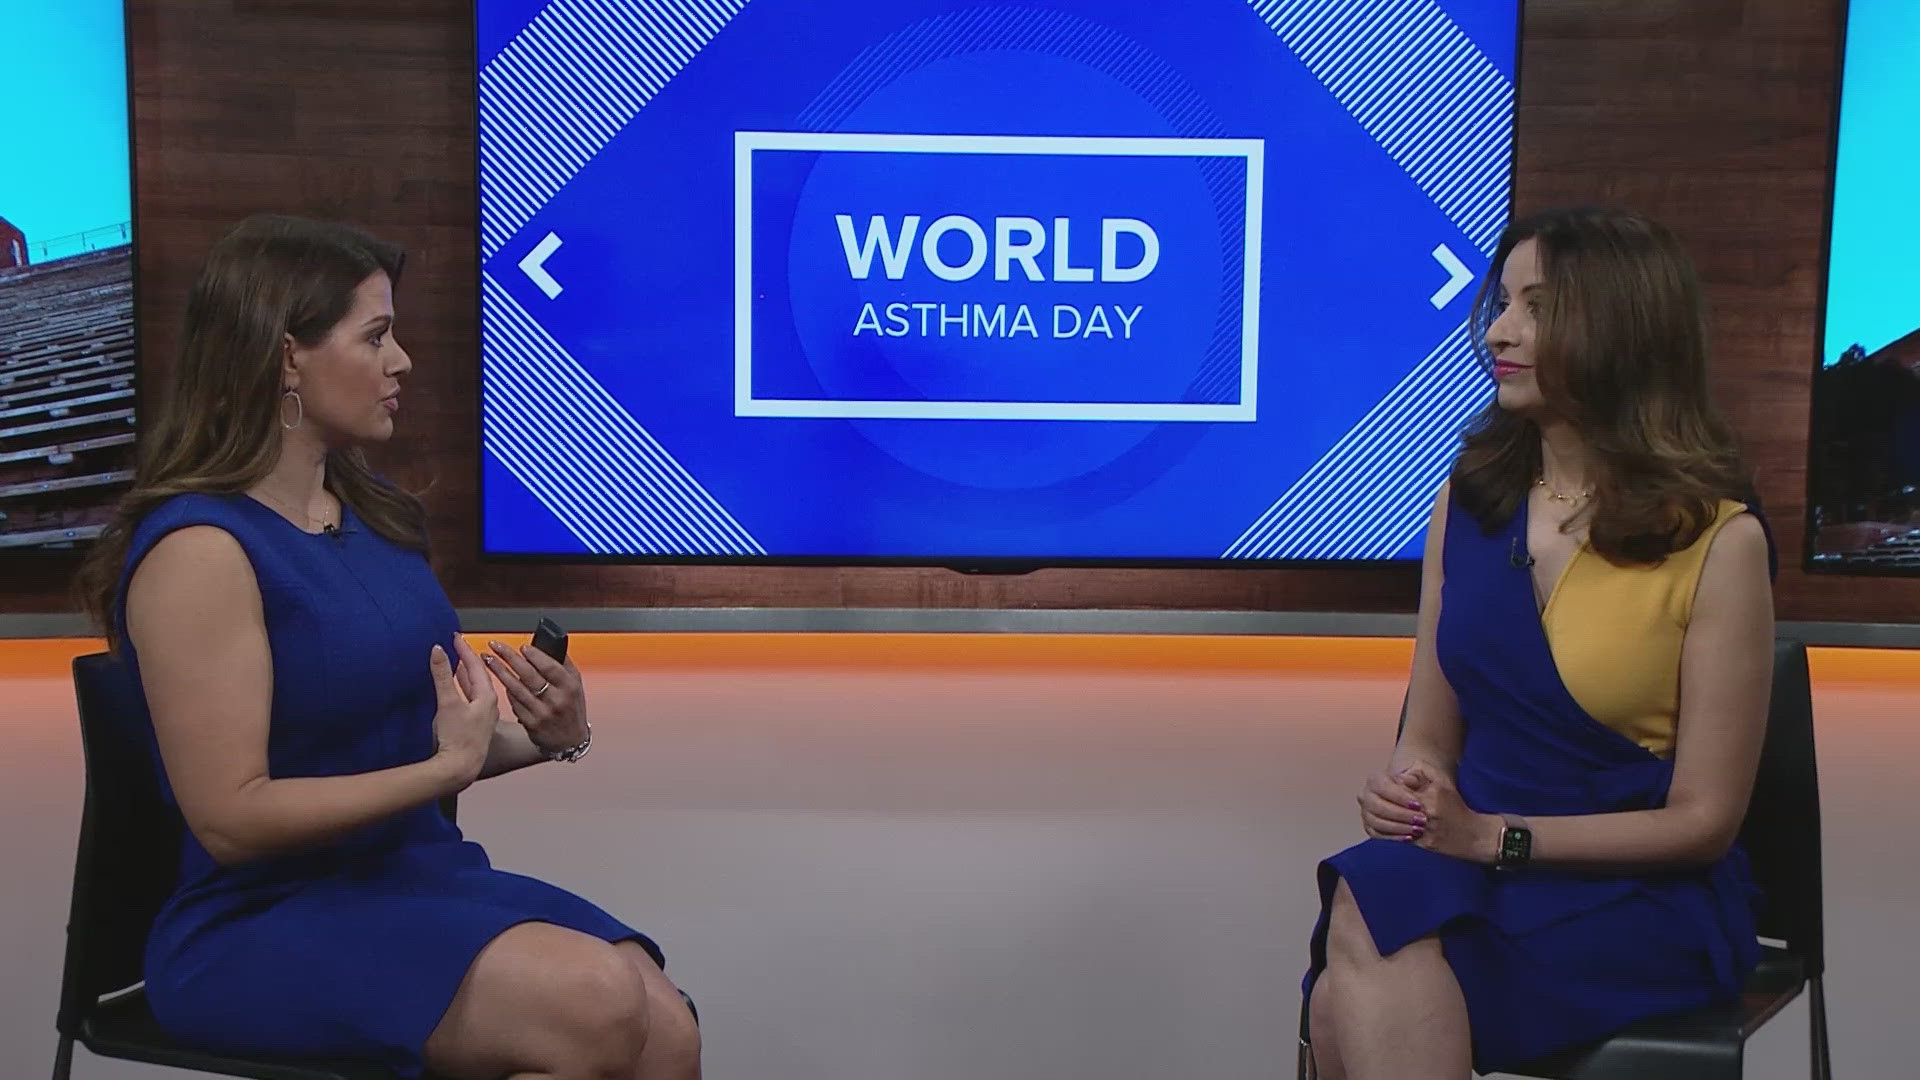 9NEWS Health Expert Dr. Payal Kohli goes over the signs and symptoms of asthma on World Asthma Day.